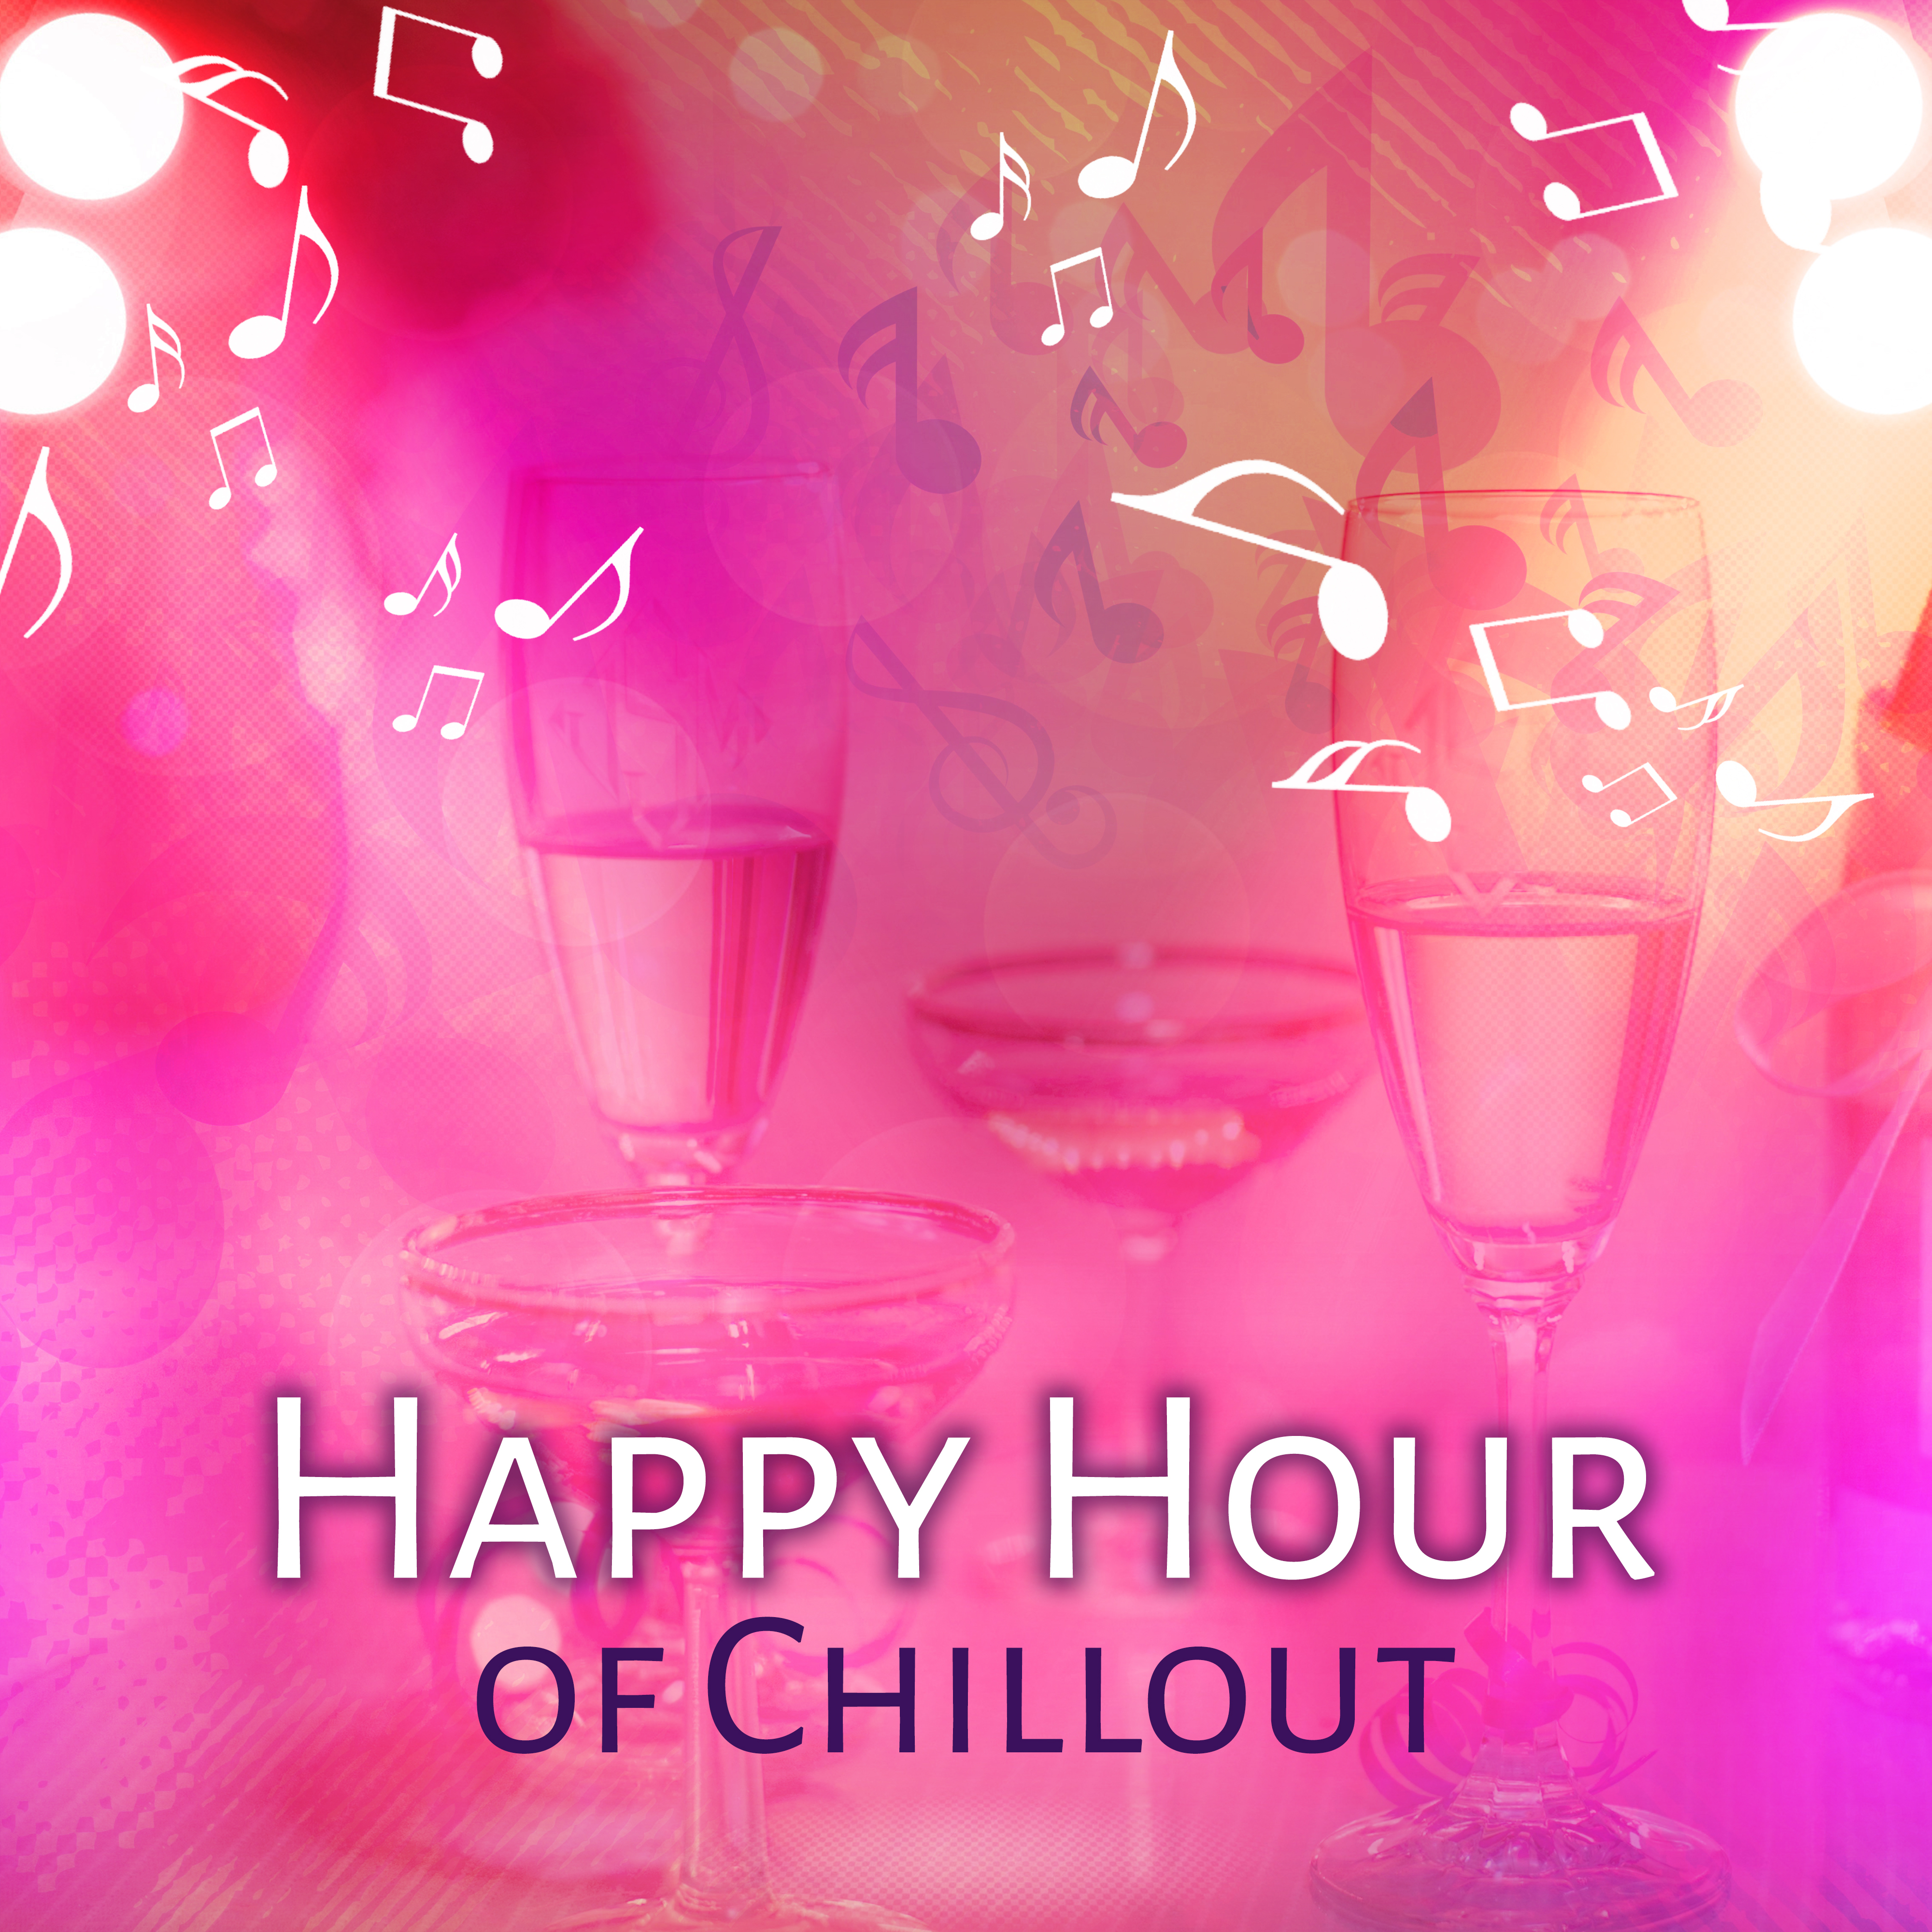 Happy Hour of Chillout – Chill Out Music, Electronic Sounds, Deep Vibes, Summer Sounds, Relax, Ibiza Dream